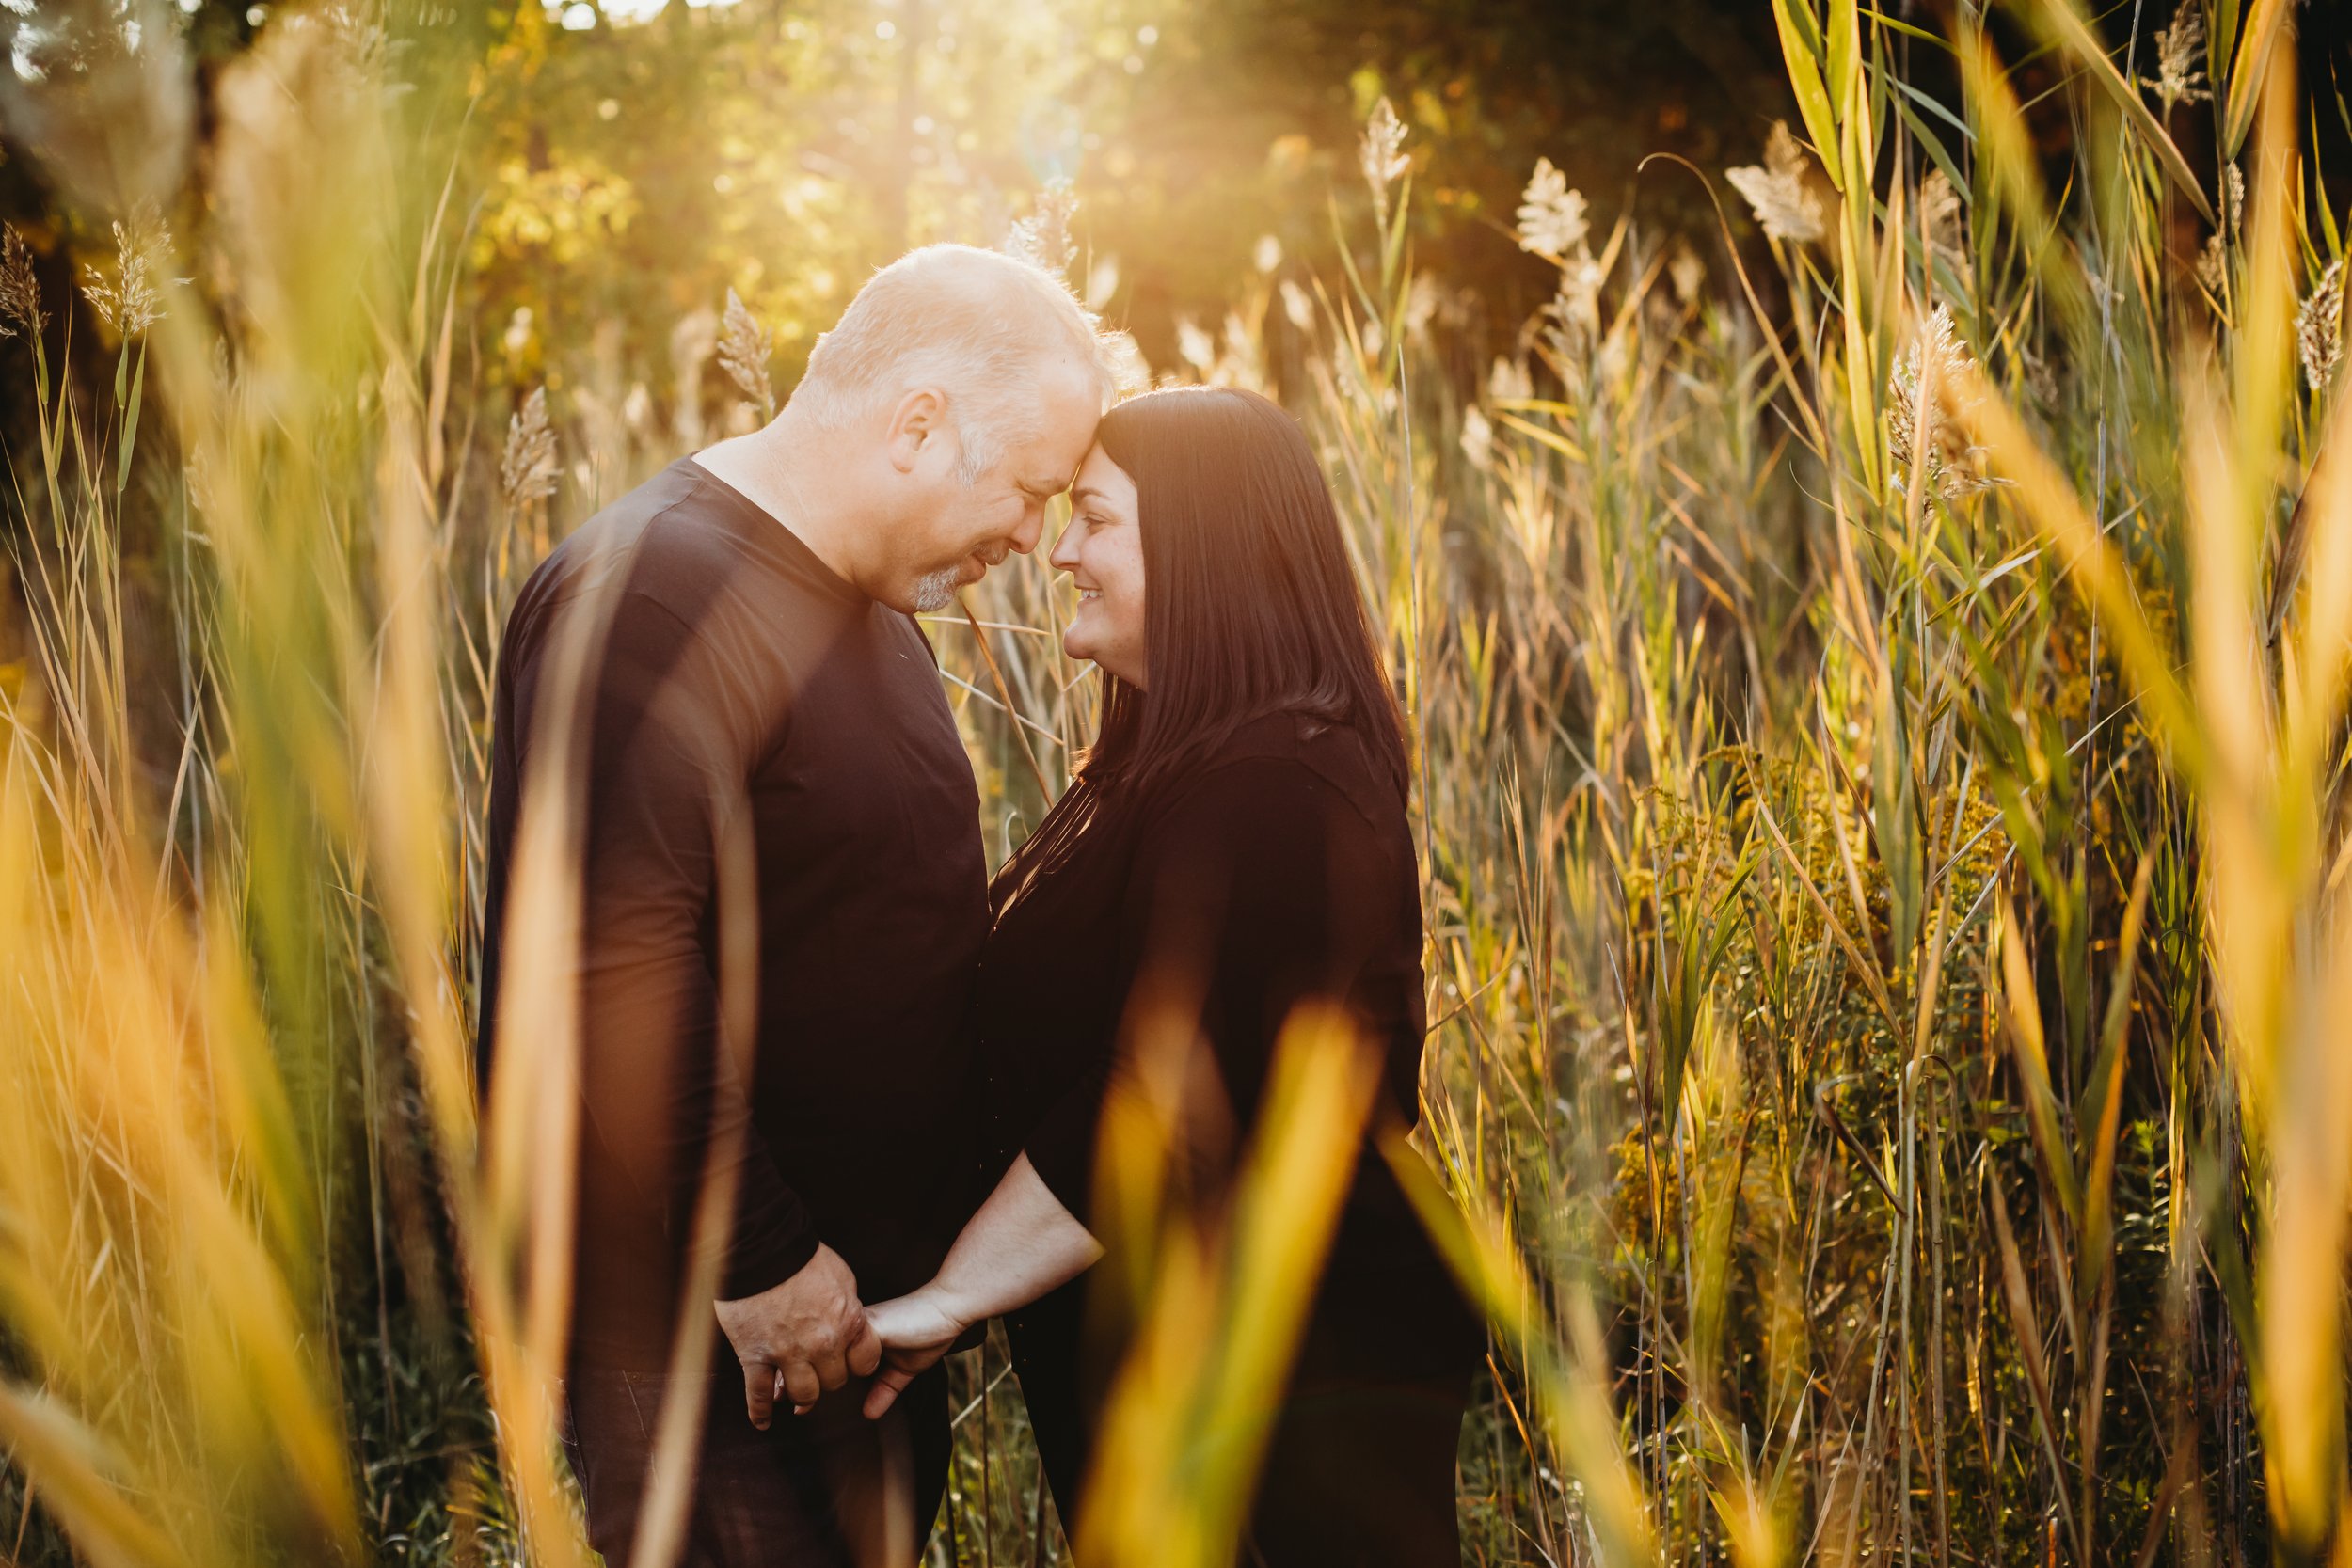  In a bright warm light field, a husband and wife put their foreheads together by Teala Ward Photography. husband and wife black outfits summer locations in Illinois #TealaWardPhotography #TealaWardFamilies #Outdoorfamilyportraits #IllinoisPhotograph